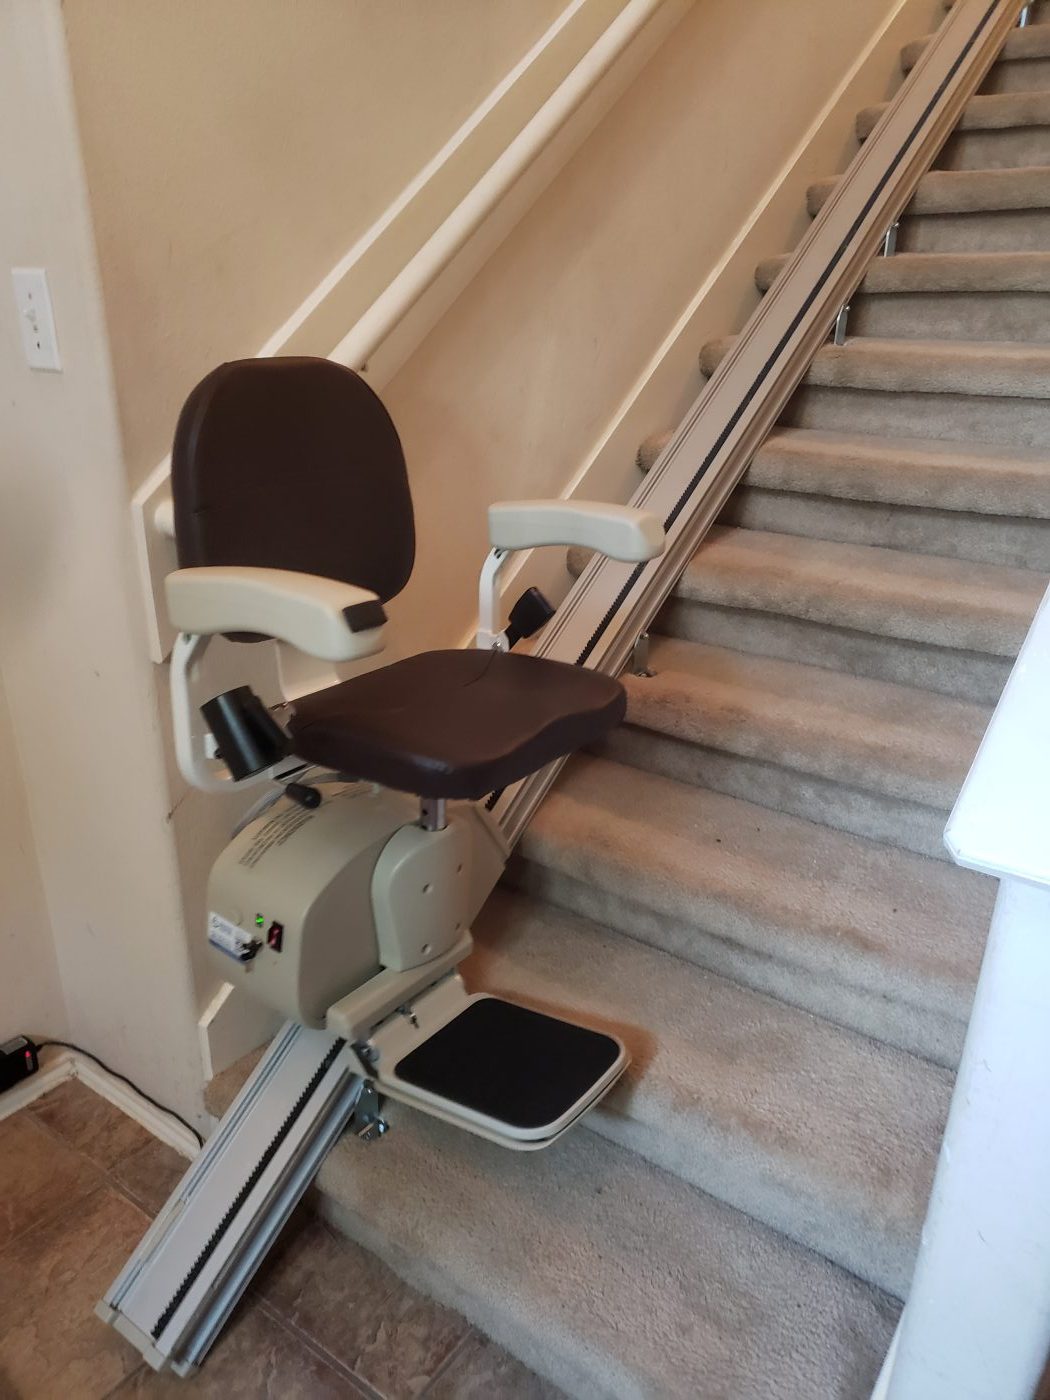 Stair Lifts, Chair Glides, Installation & Service